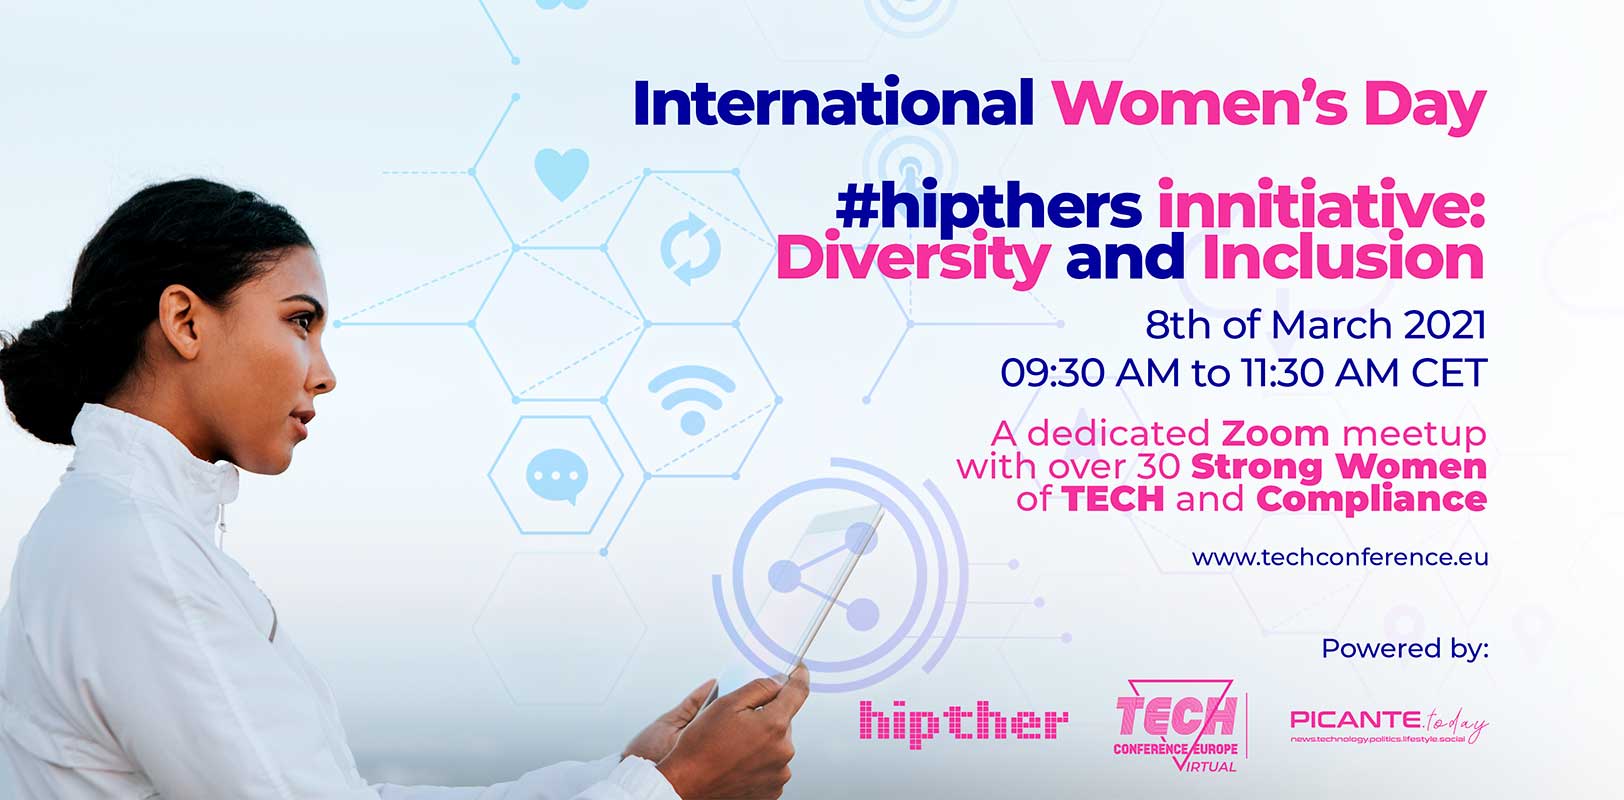 you-are-invited-to-the-international-women’s-day-initiative-by-the-#hipthers-(online-meetup-on-diversity-and-inclusion)